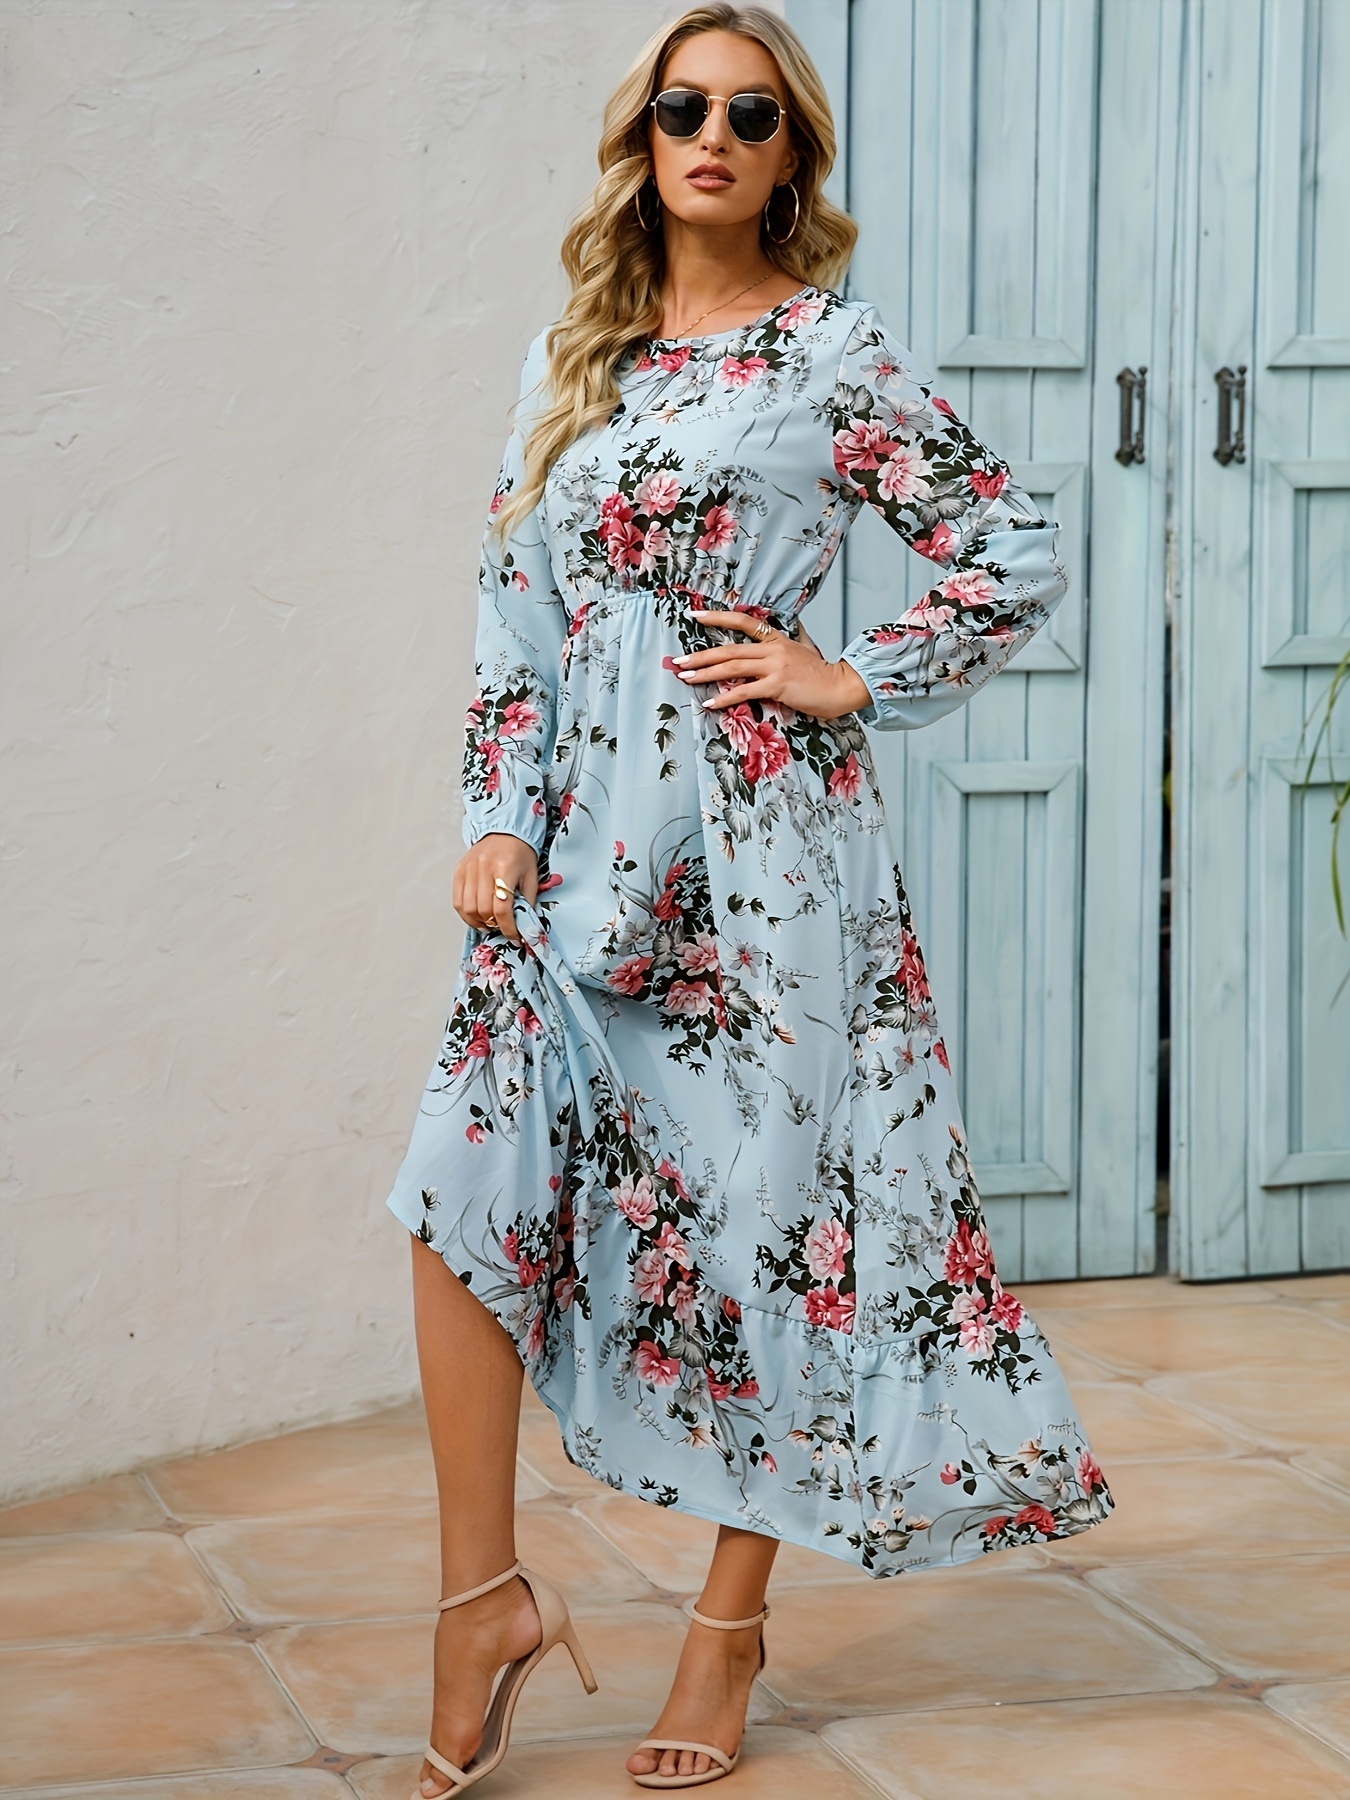 ditsy floral print dress vacation crew neck long sleeve maxi dress womens clothing